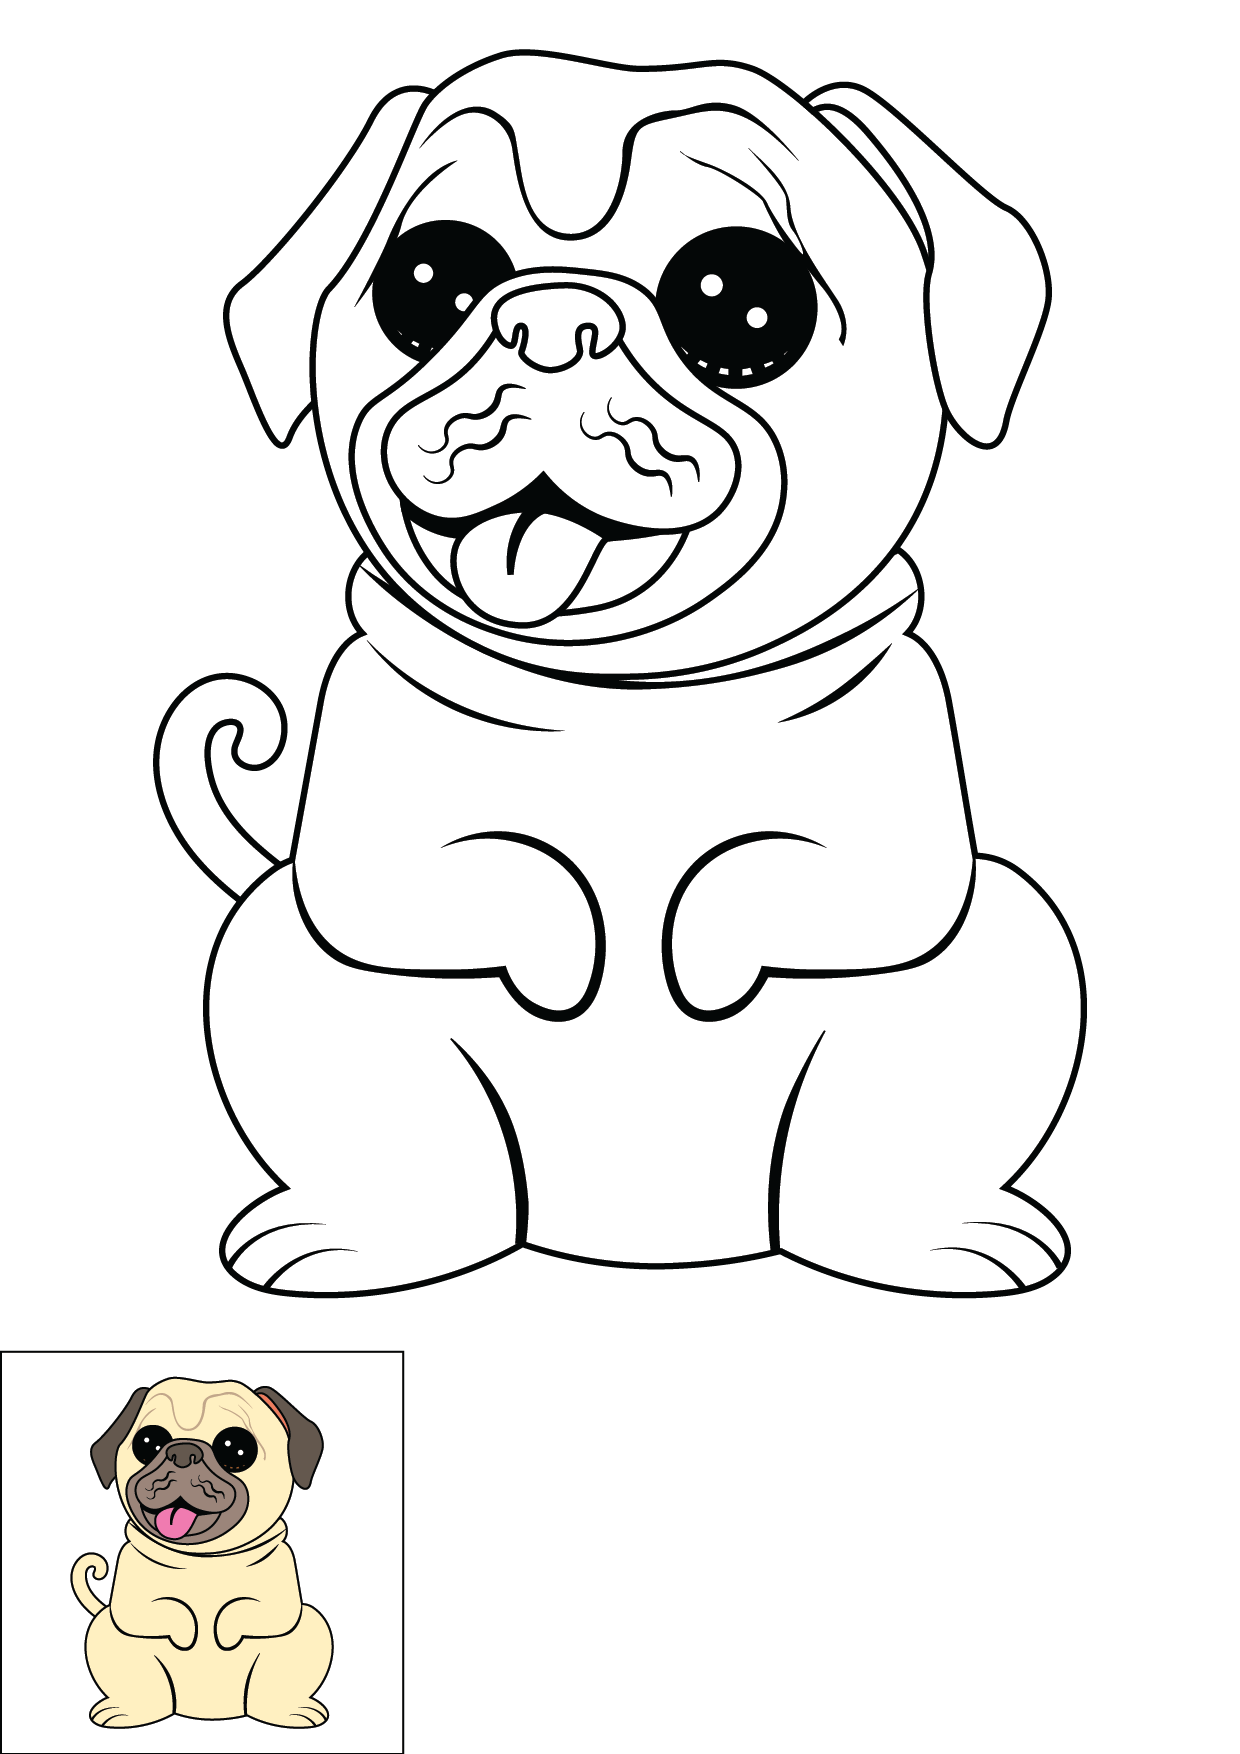 How to Draw A Pug Step by Step Printable Color